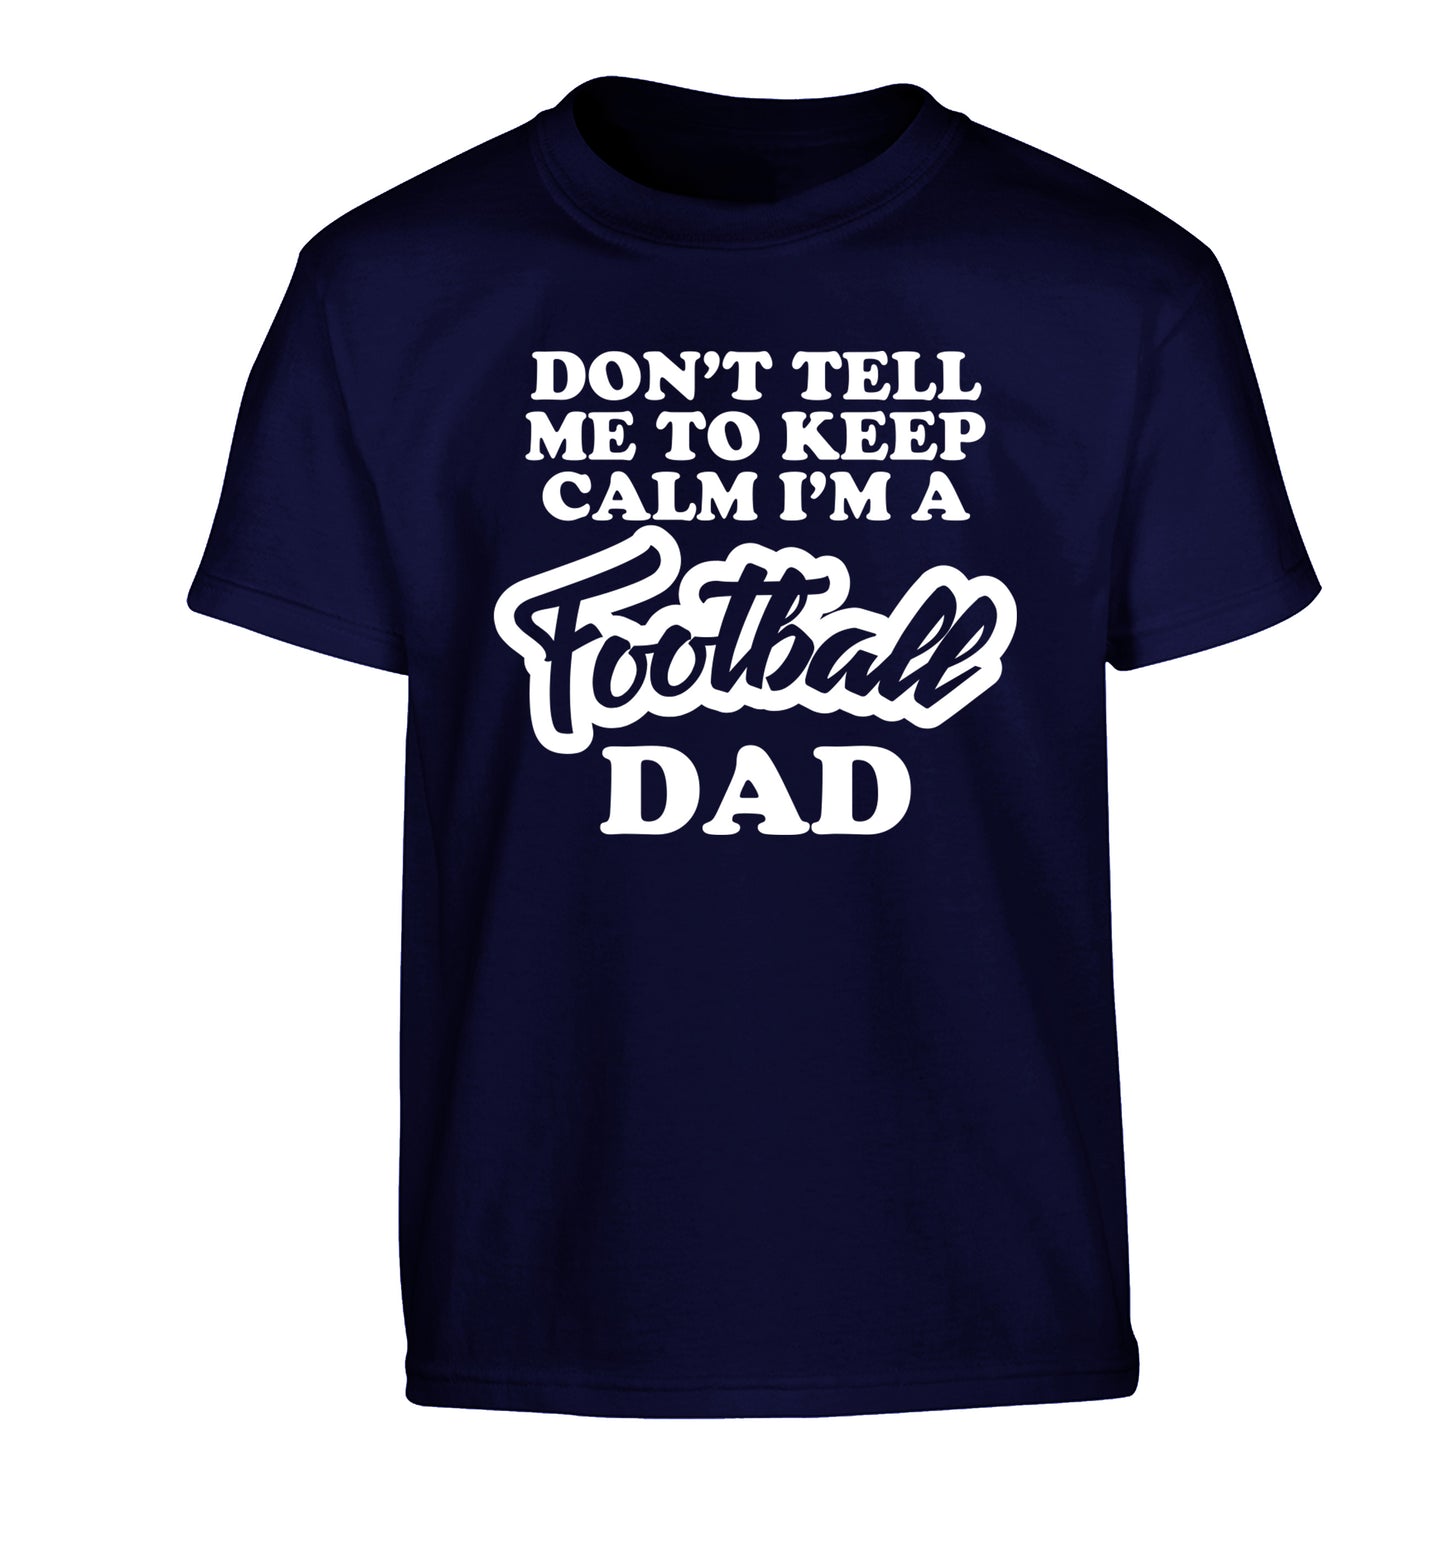 Don't tell me to keep calm I'm a football dad Children's navy Tshirt 12-14 Years